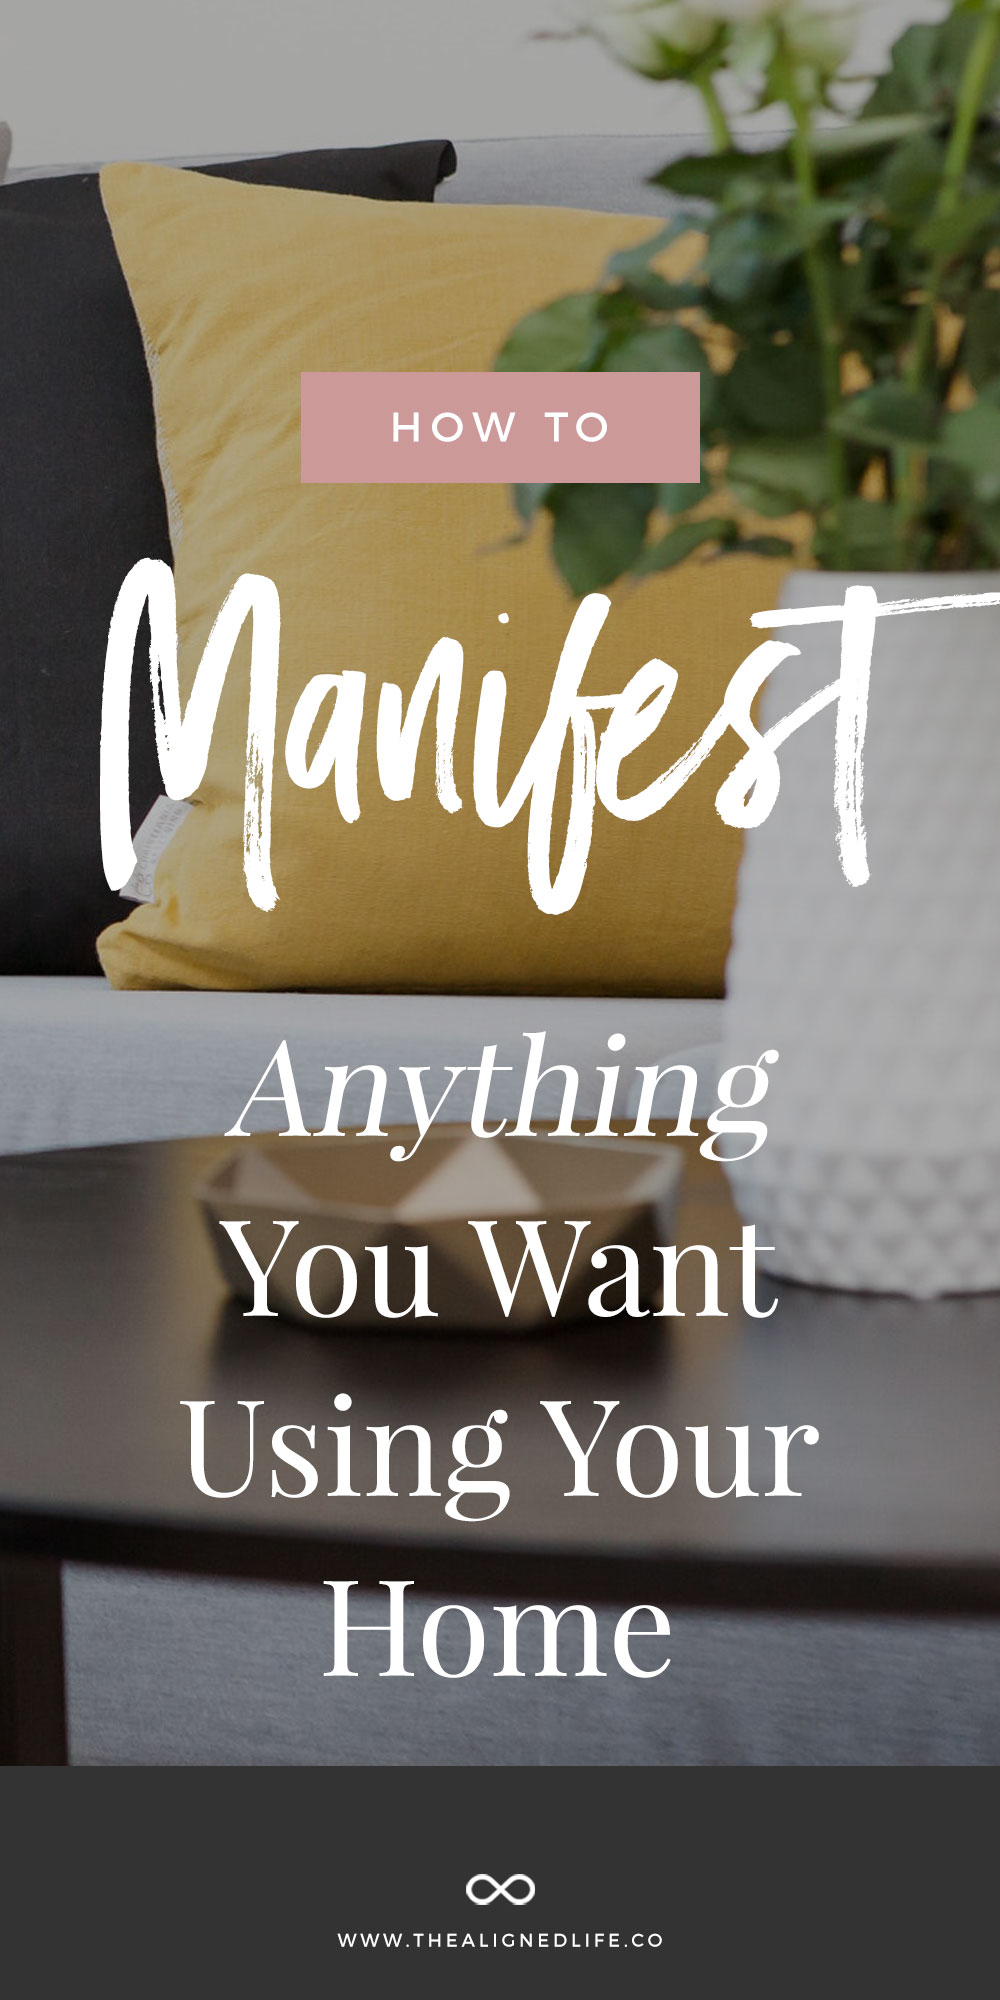 How to Manifest Anything You Want Using Your Home